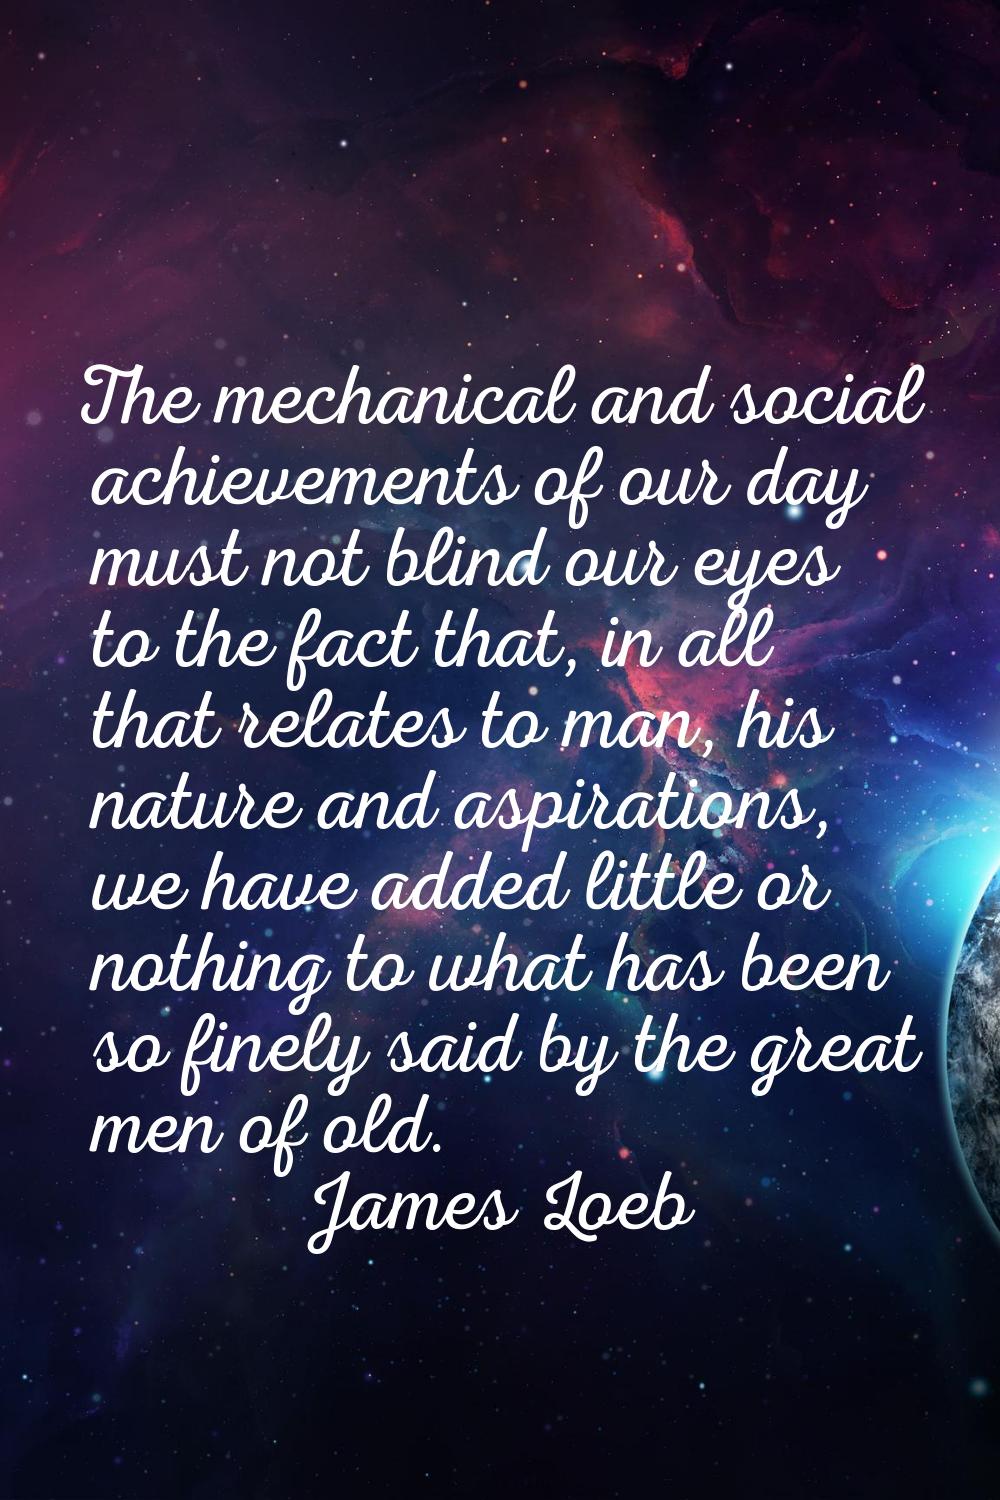 The mechanical and social achievements of our day must not blind our eyes to the fact that, in all 